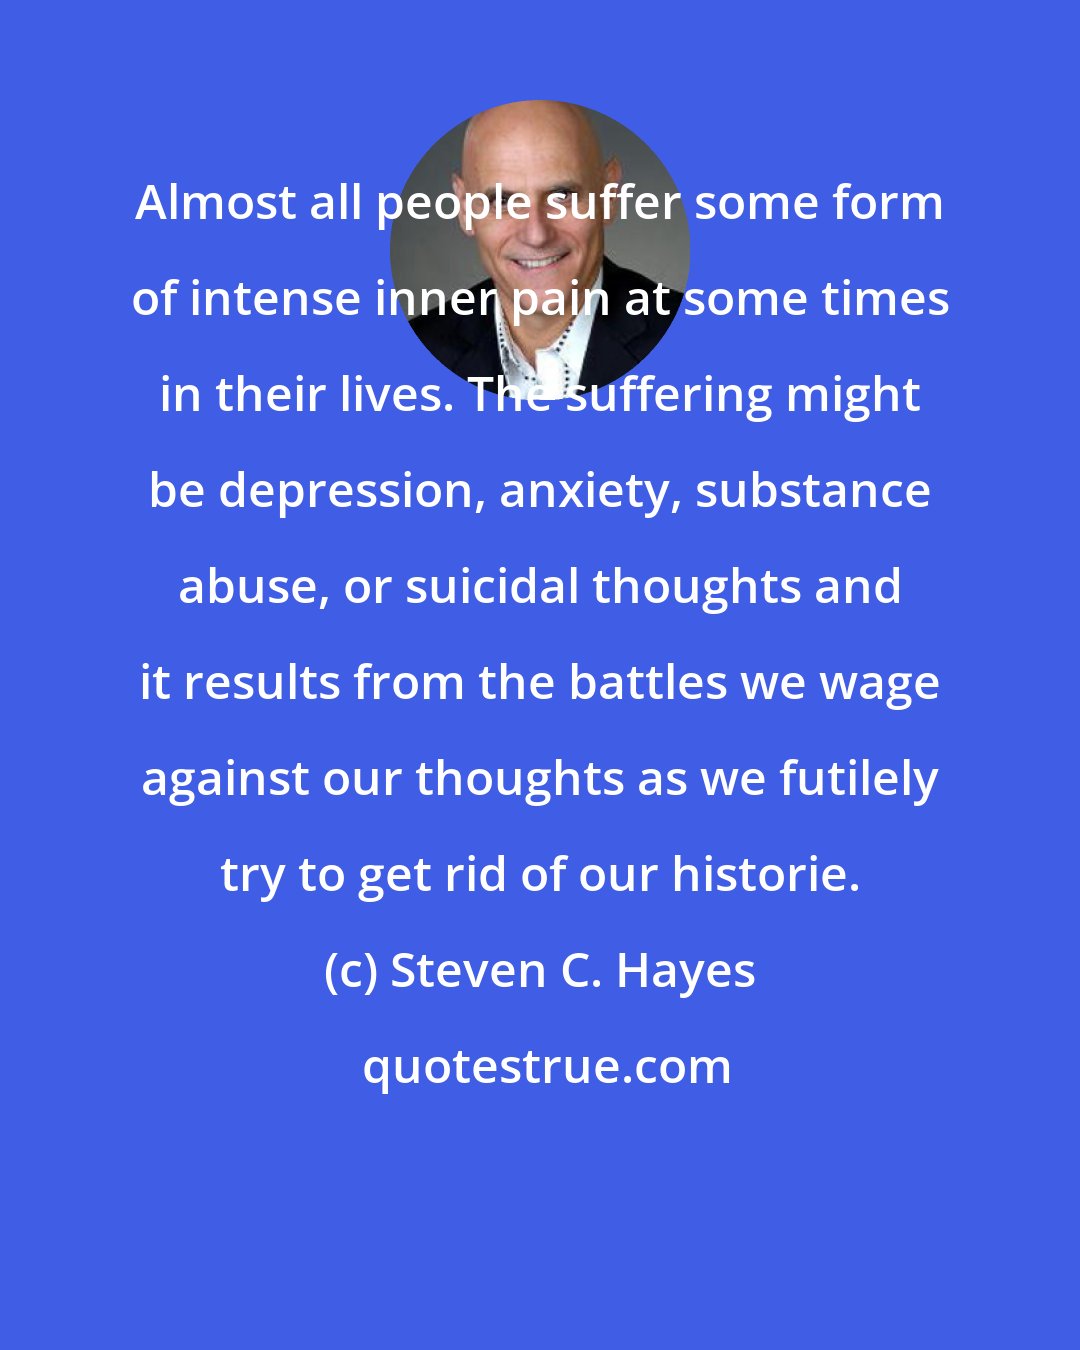 Steven C. Hayes: Almost all people suffer some form of intense inner pain at some times in their lives. The suffering might be depression, anxiety, substance abuse, or suicidal thoughts and it results from the battles we wage against our thoughts as we futilely try to get rid of our historie.